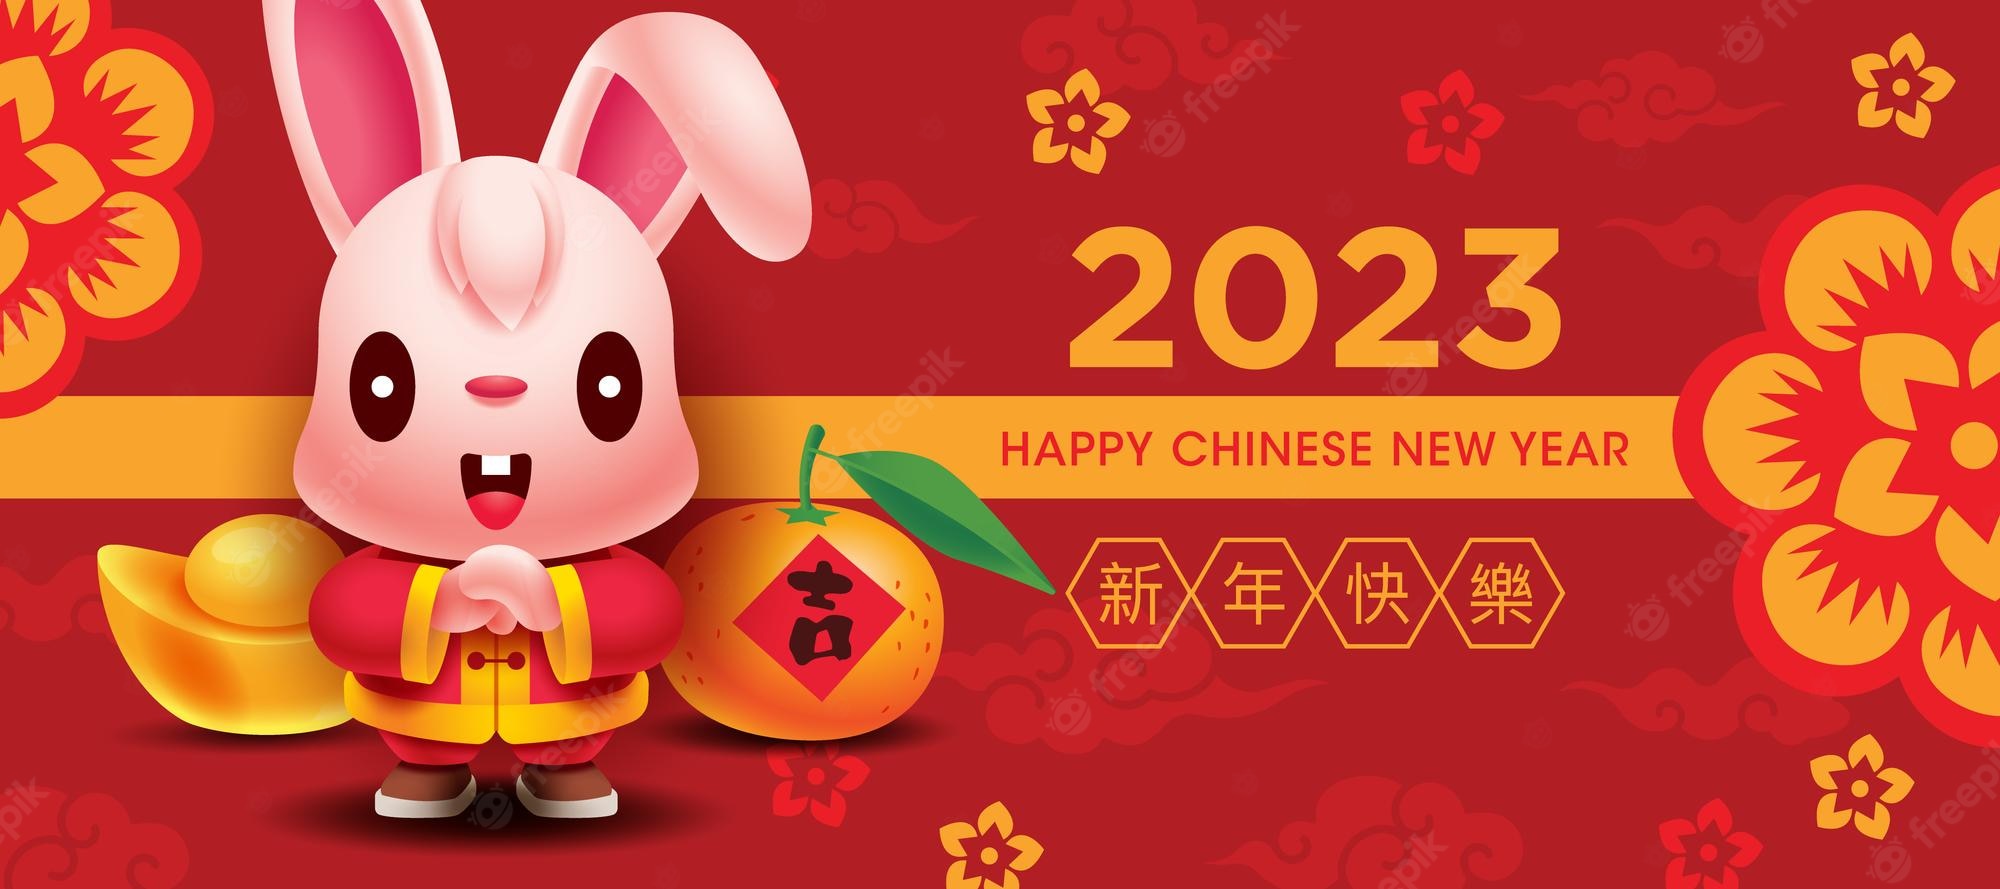 Chinese Spring Festival-The Year of the Rabbit